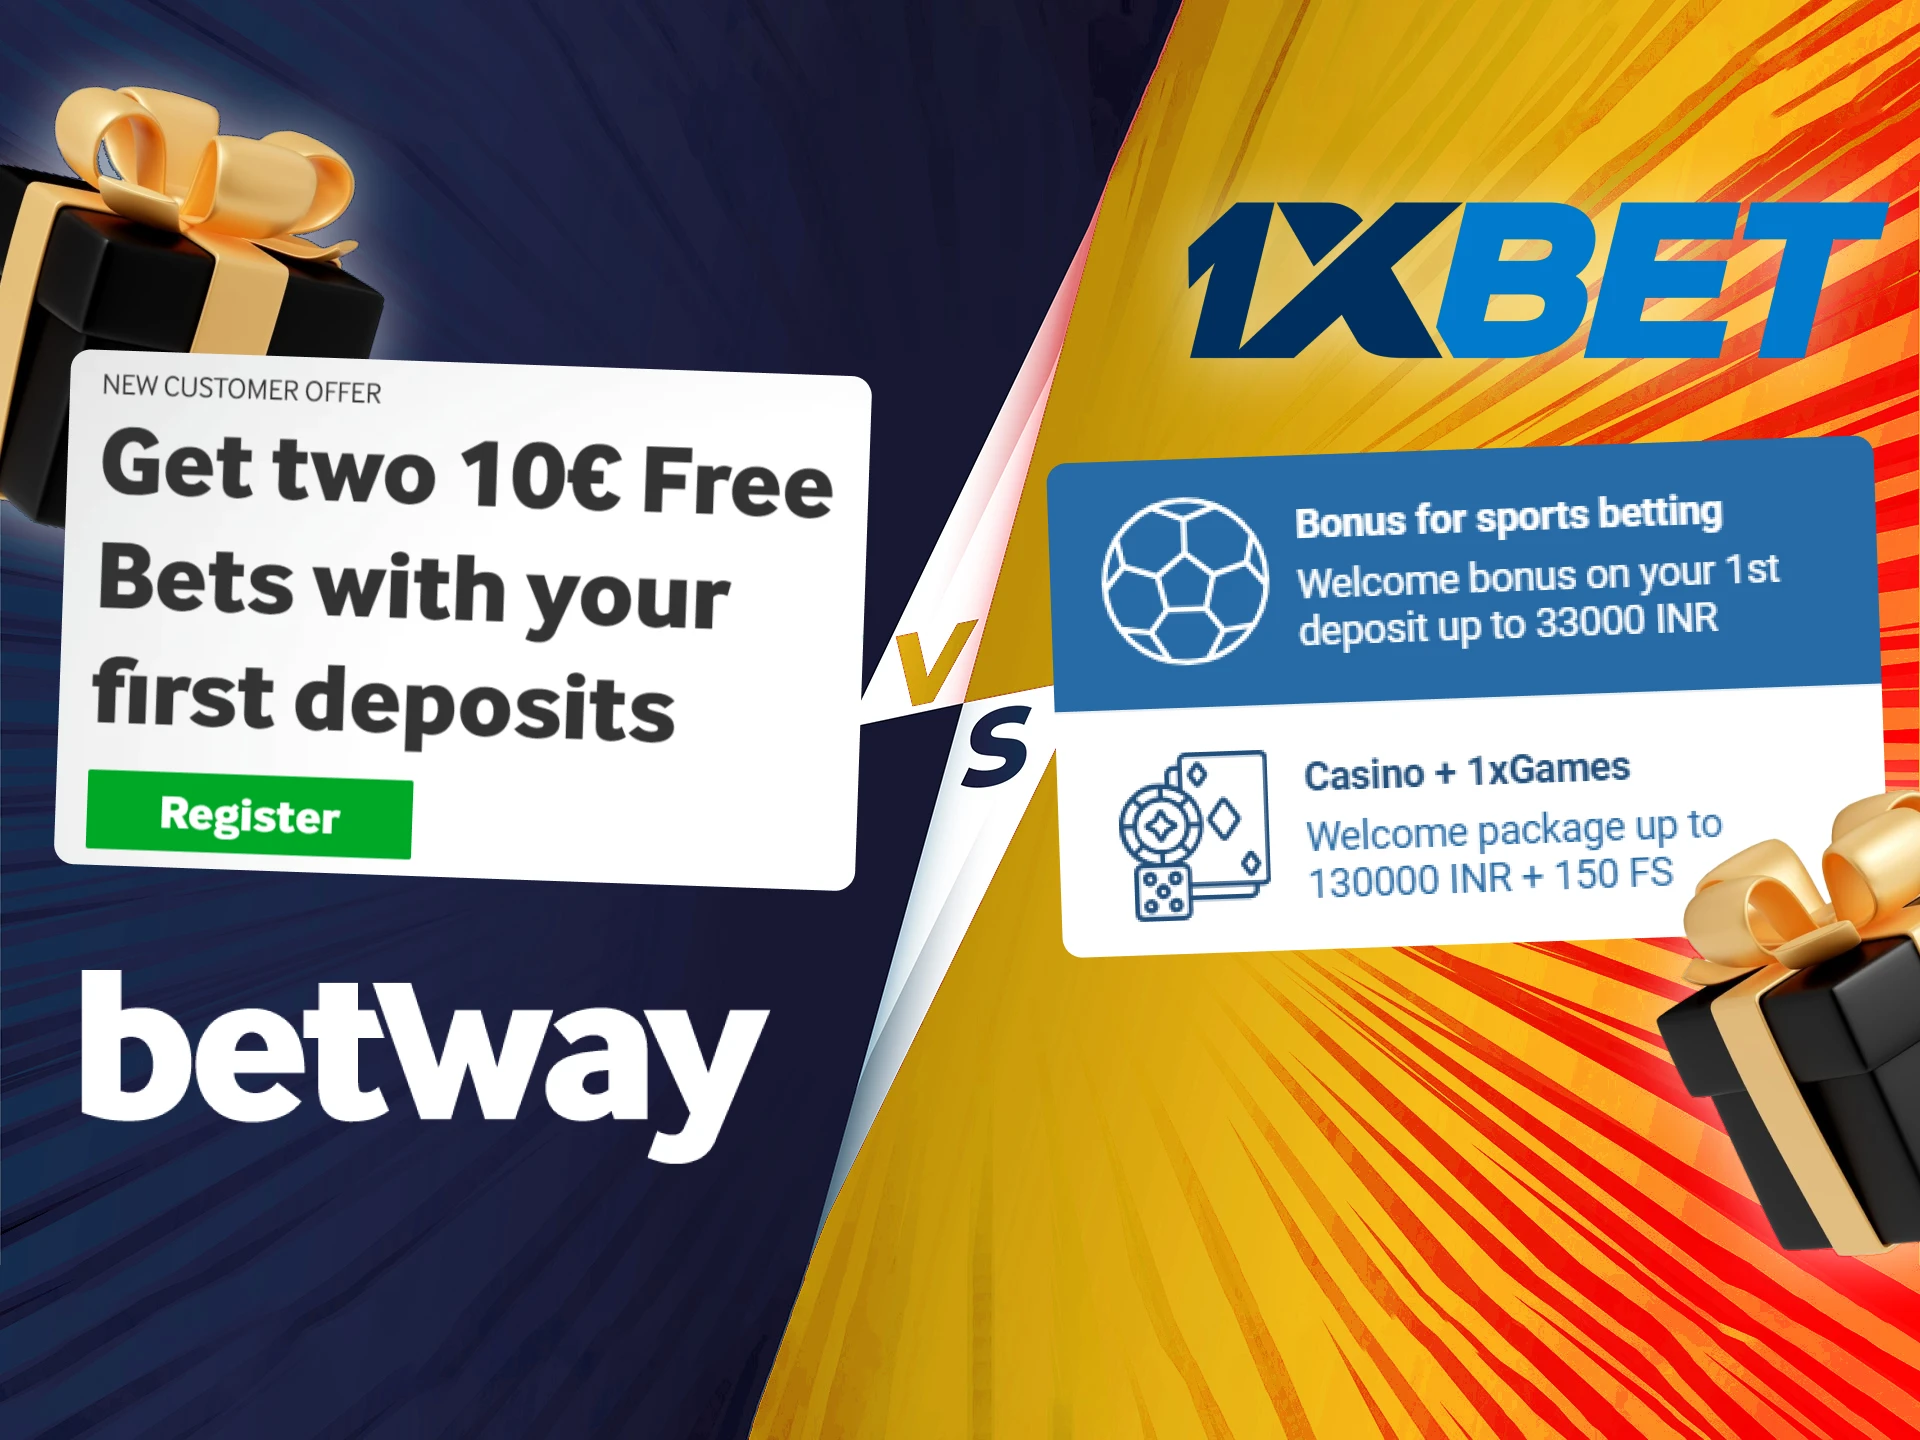 Betway and 1xbet offer profitable bonuses their users.